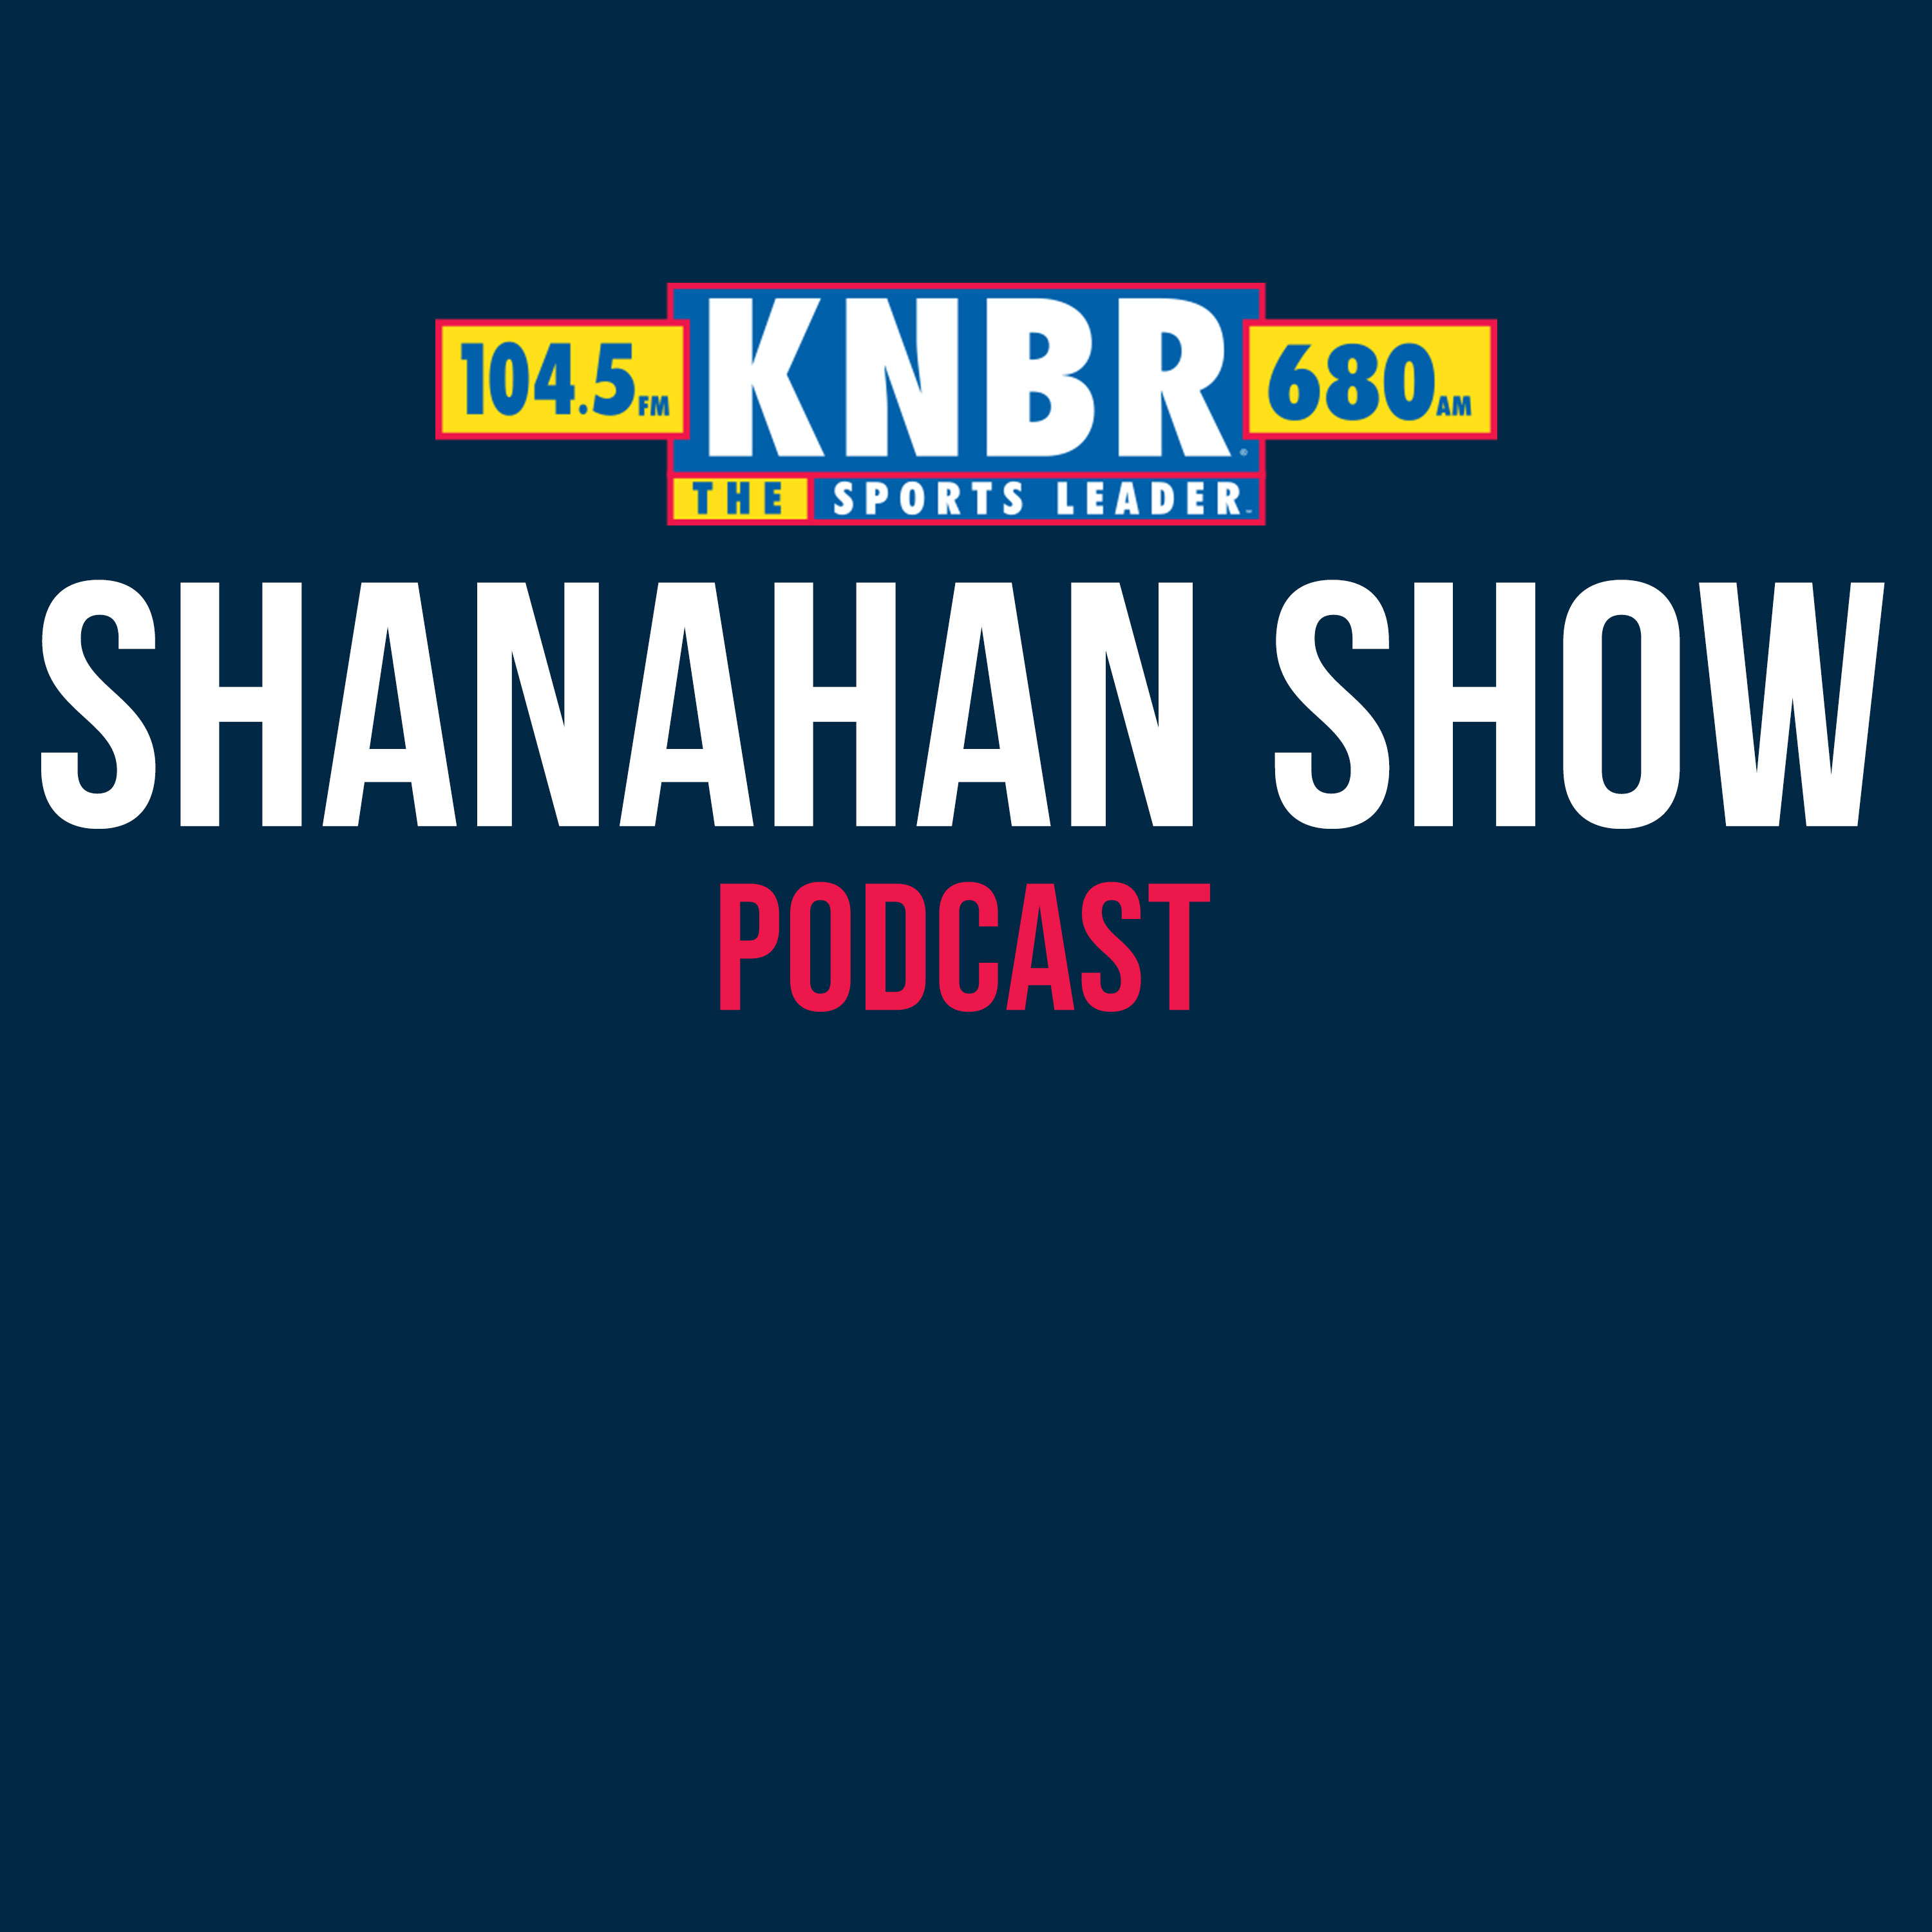 12-21 Kyle Shanahan joins Tolbert & Copes to discuss how Brock Purdy's play has given the team confidence